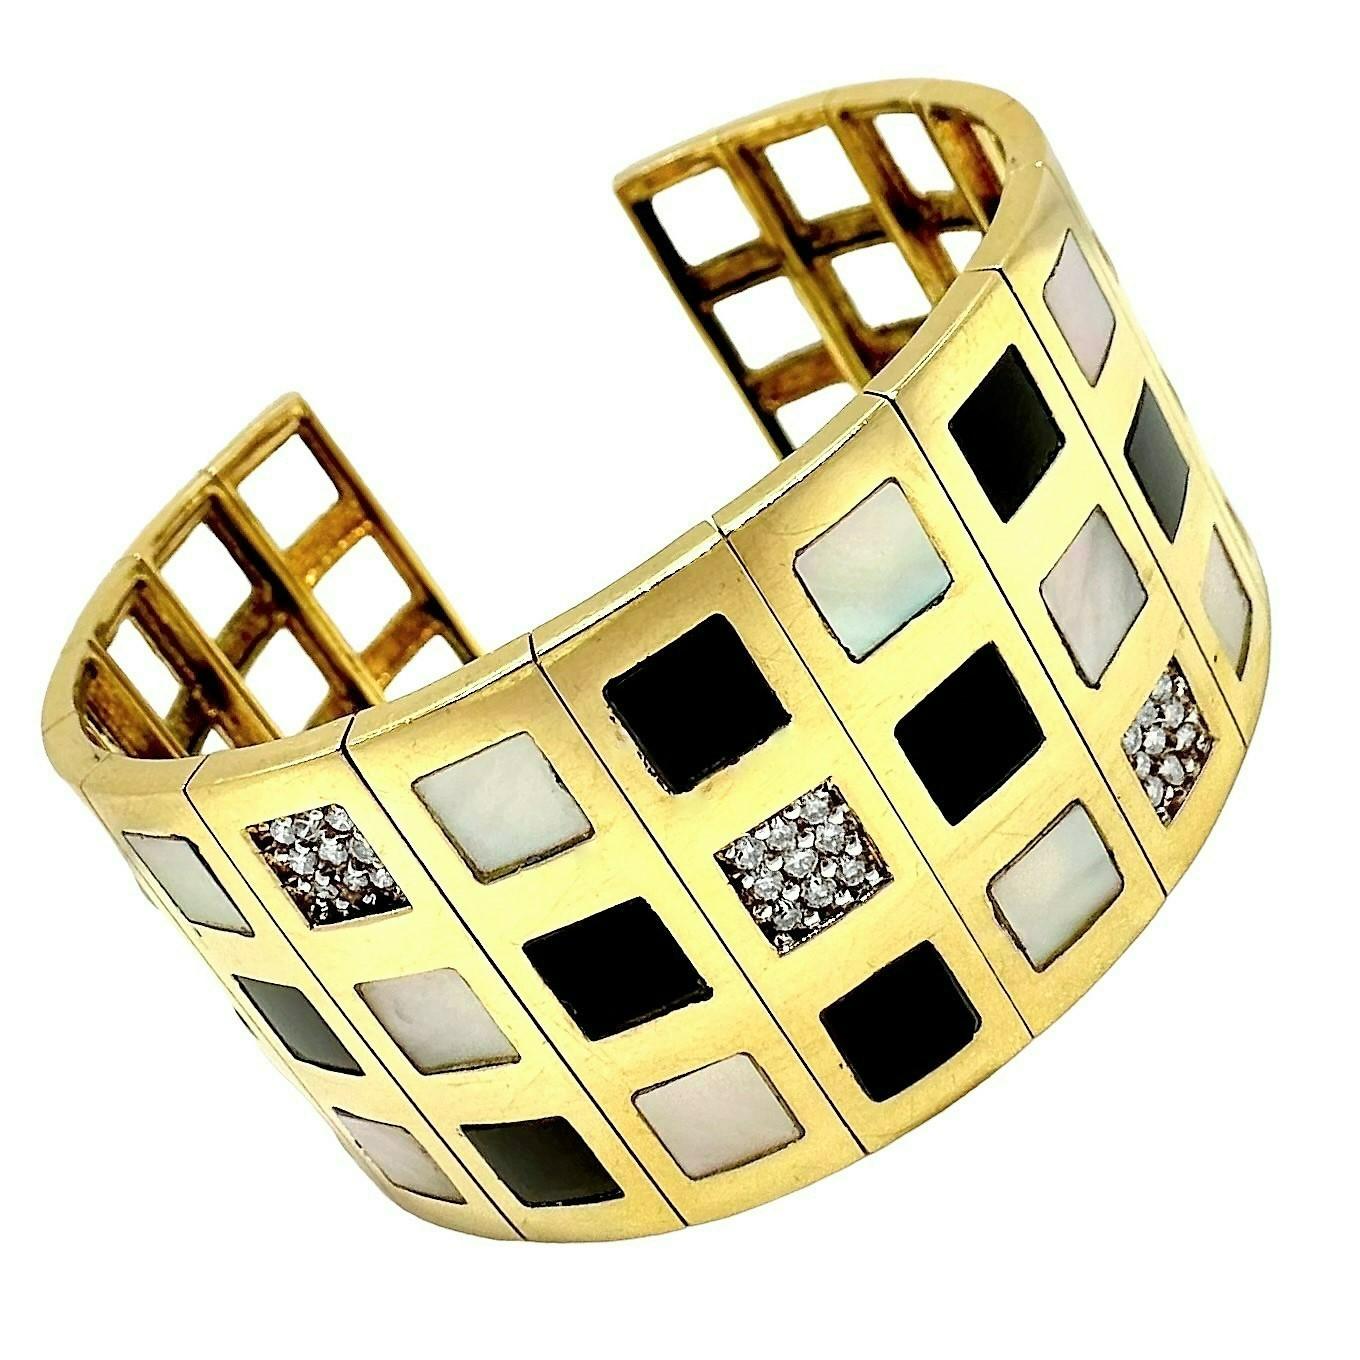 Flexible Bangle Bracelet with Diamonds, Mother of Pearl & Onyx For Sale